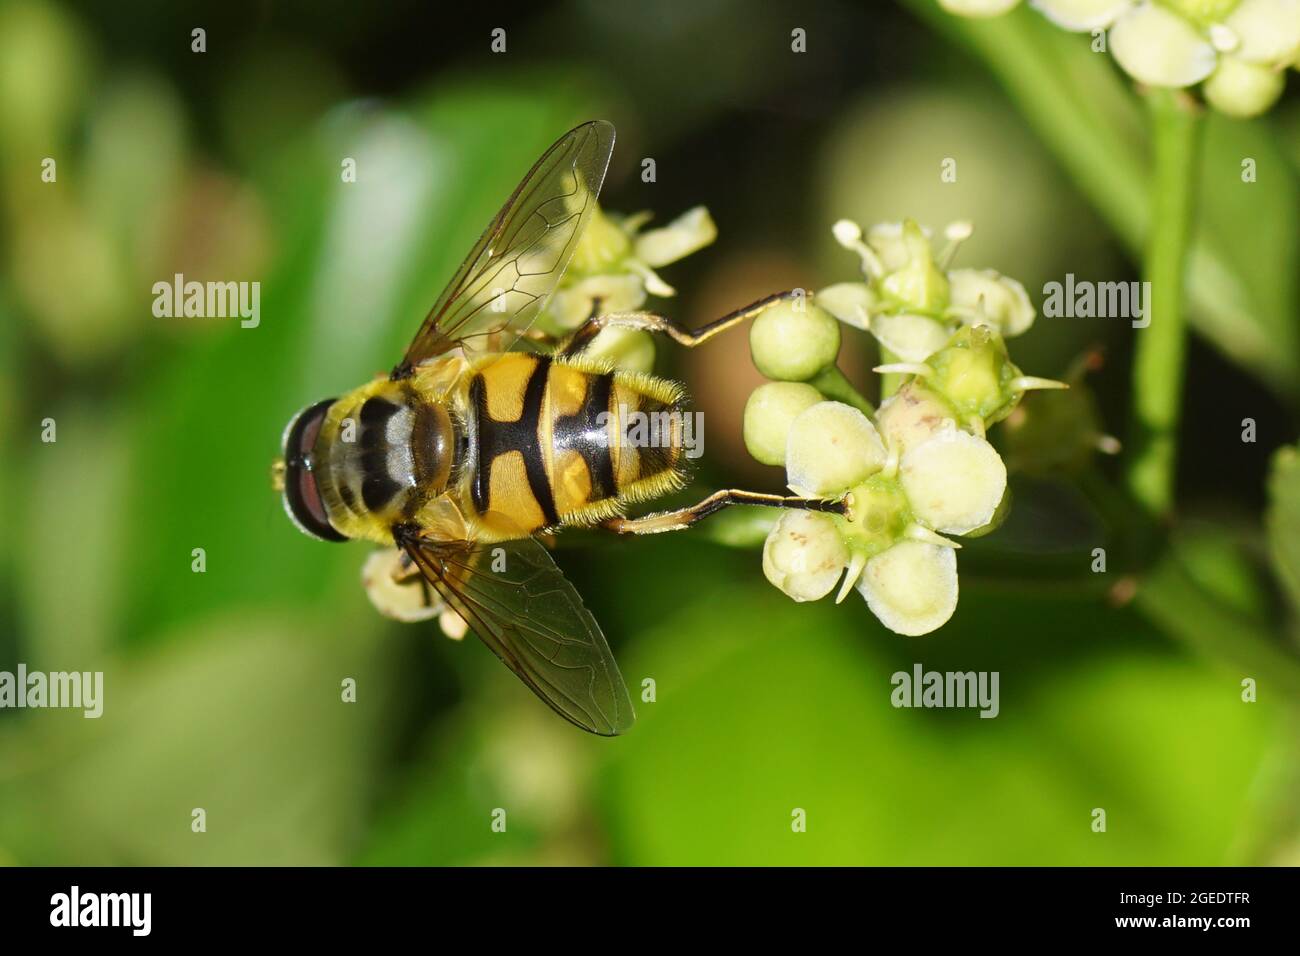 Batman hoverfly (Myathropa florea), family Syrphidae on flowers of Evergreen spindle, Japanese spindle (Euonymus japonicus). Family Celastraceae Stock Photo